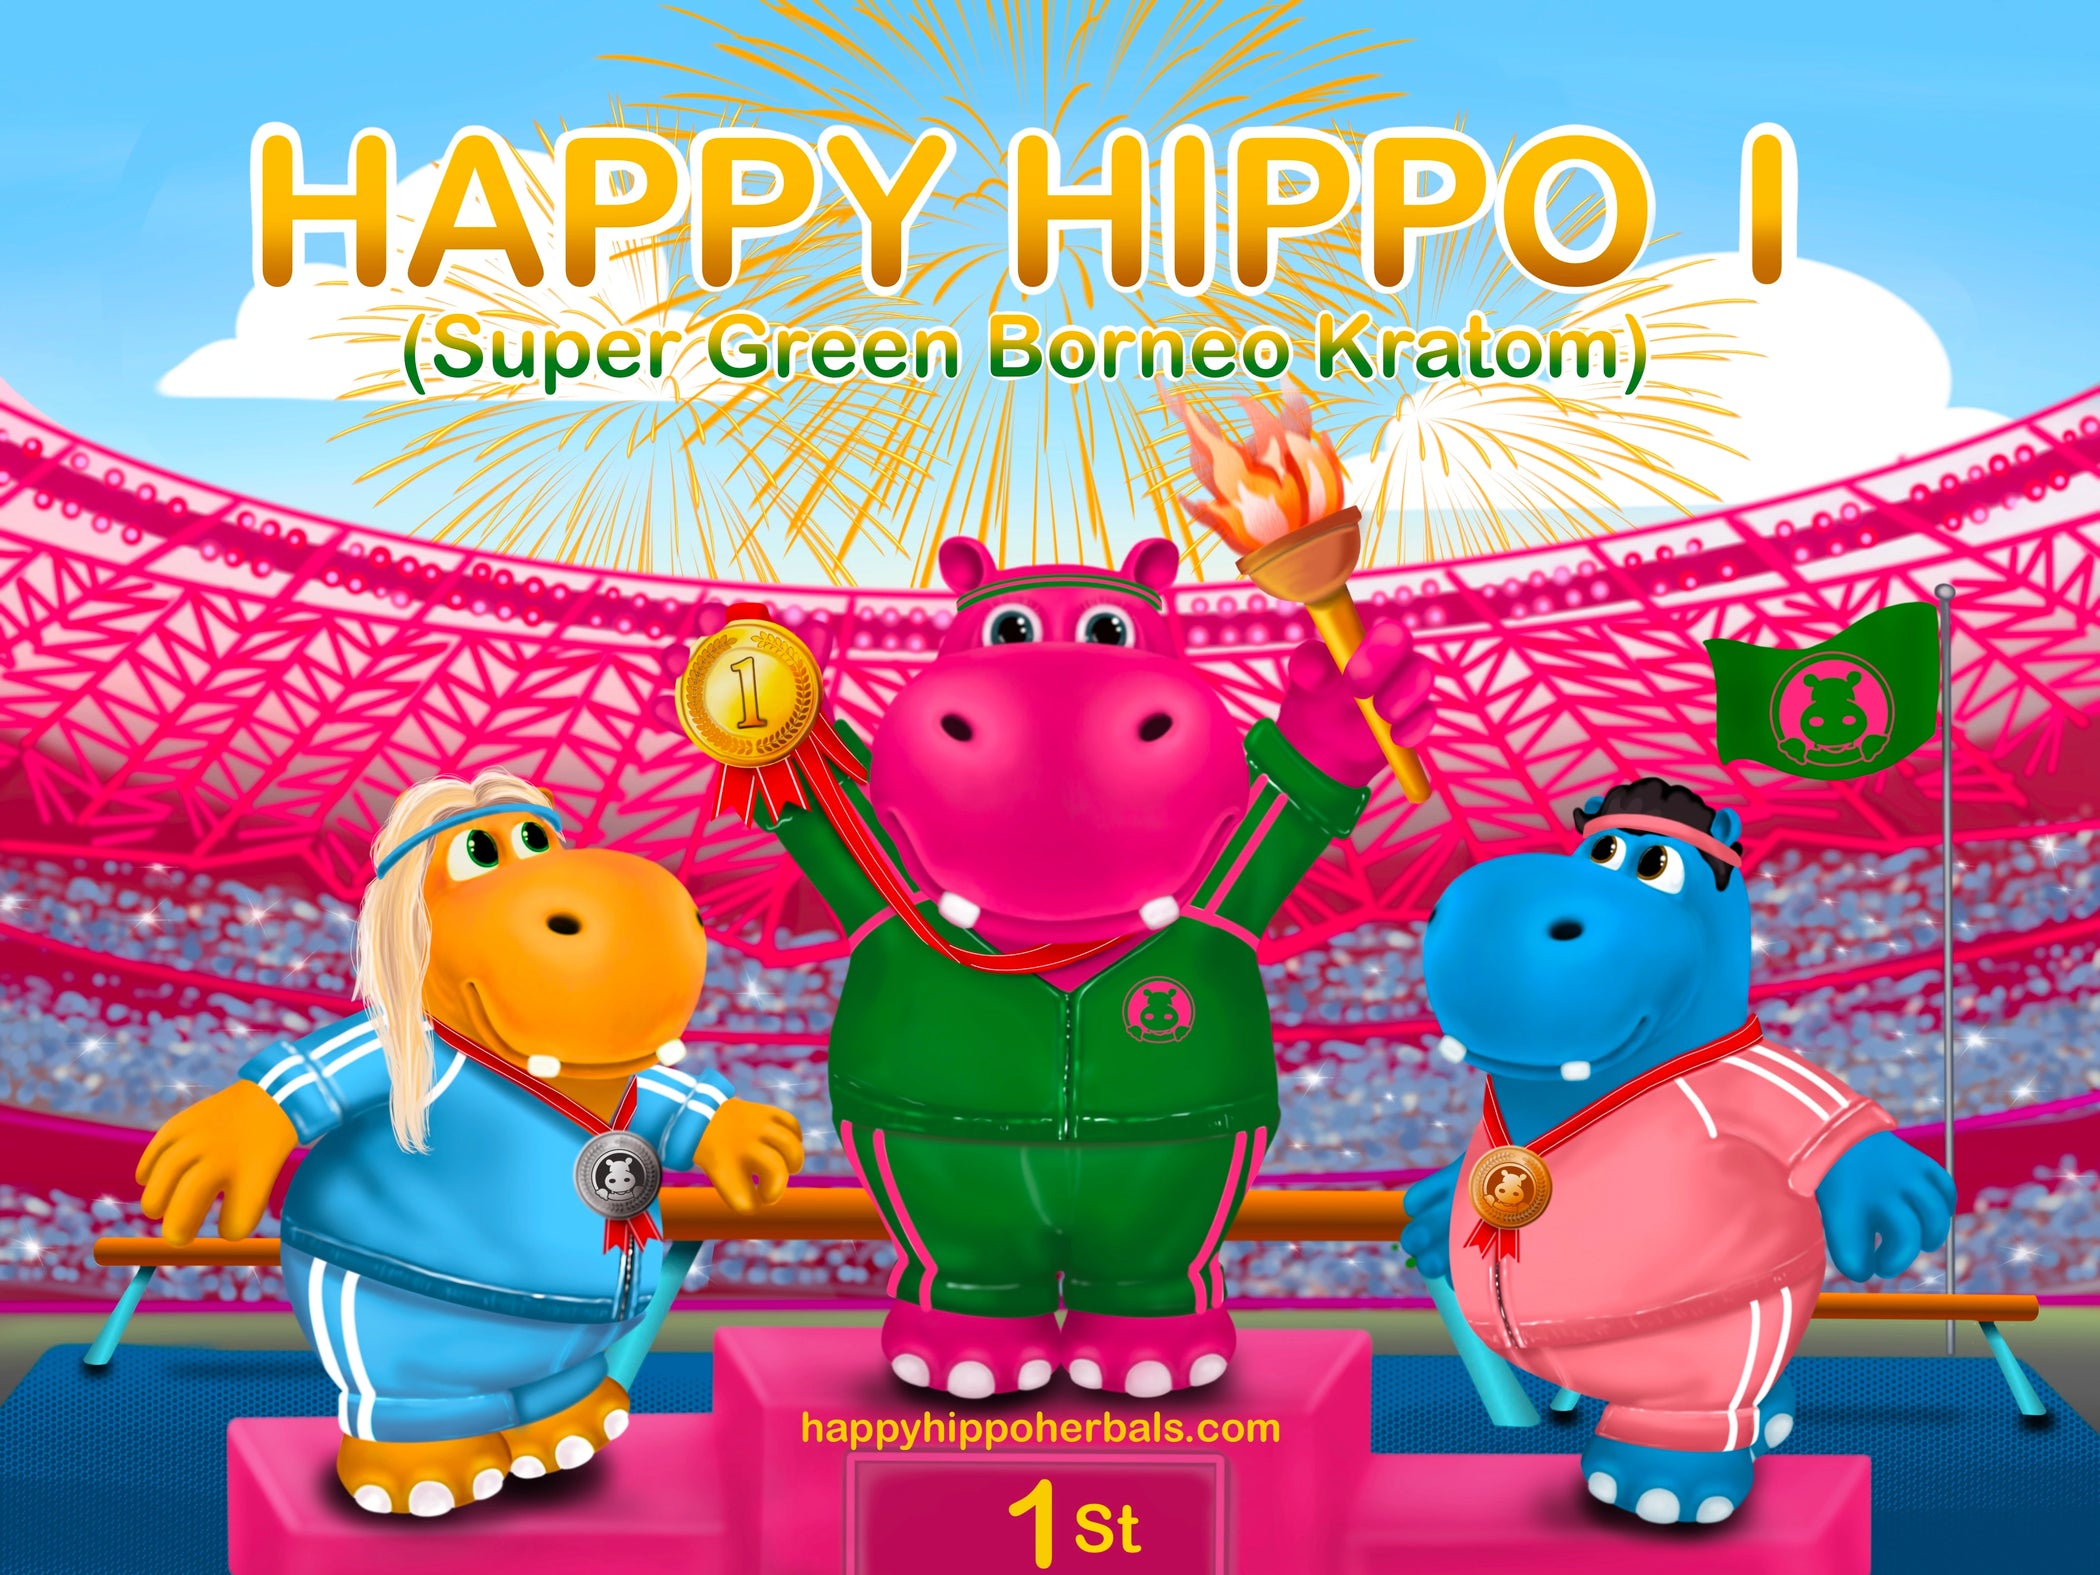 Graphic Designed image depicting Puddles the Hippo in a track suit using Green Borneo Kratom Powder (Happy Hippo I), while feeling balanced kratom effects and a calm, zen mentality